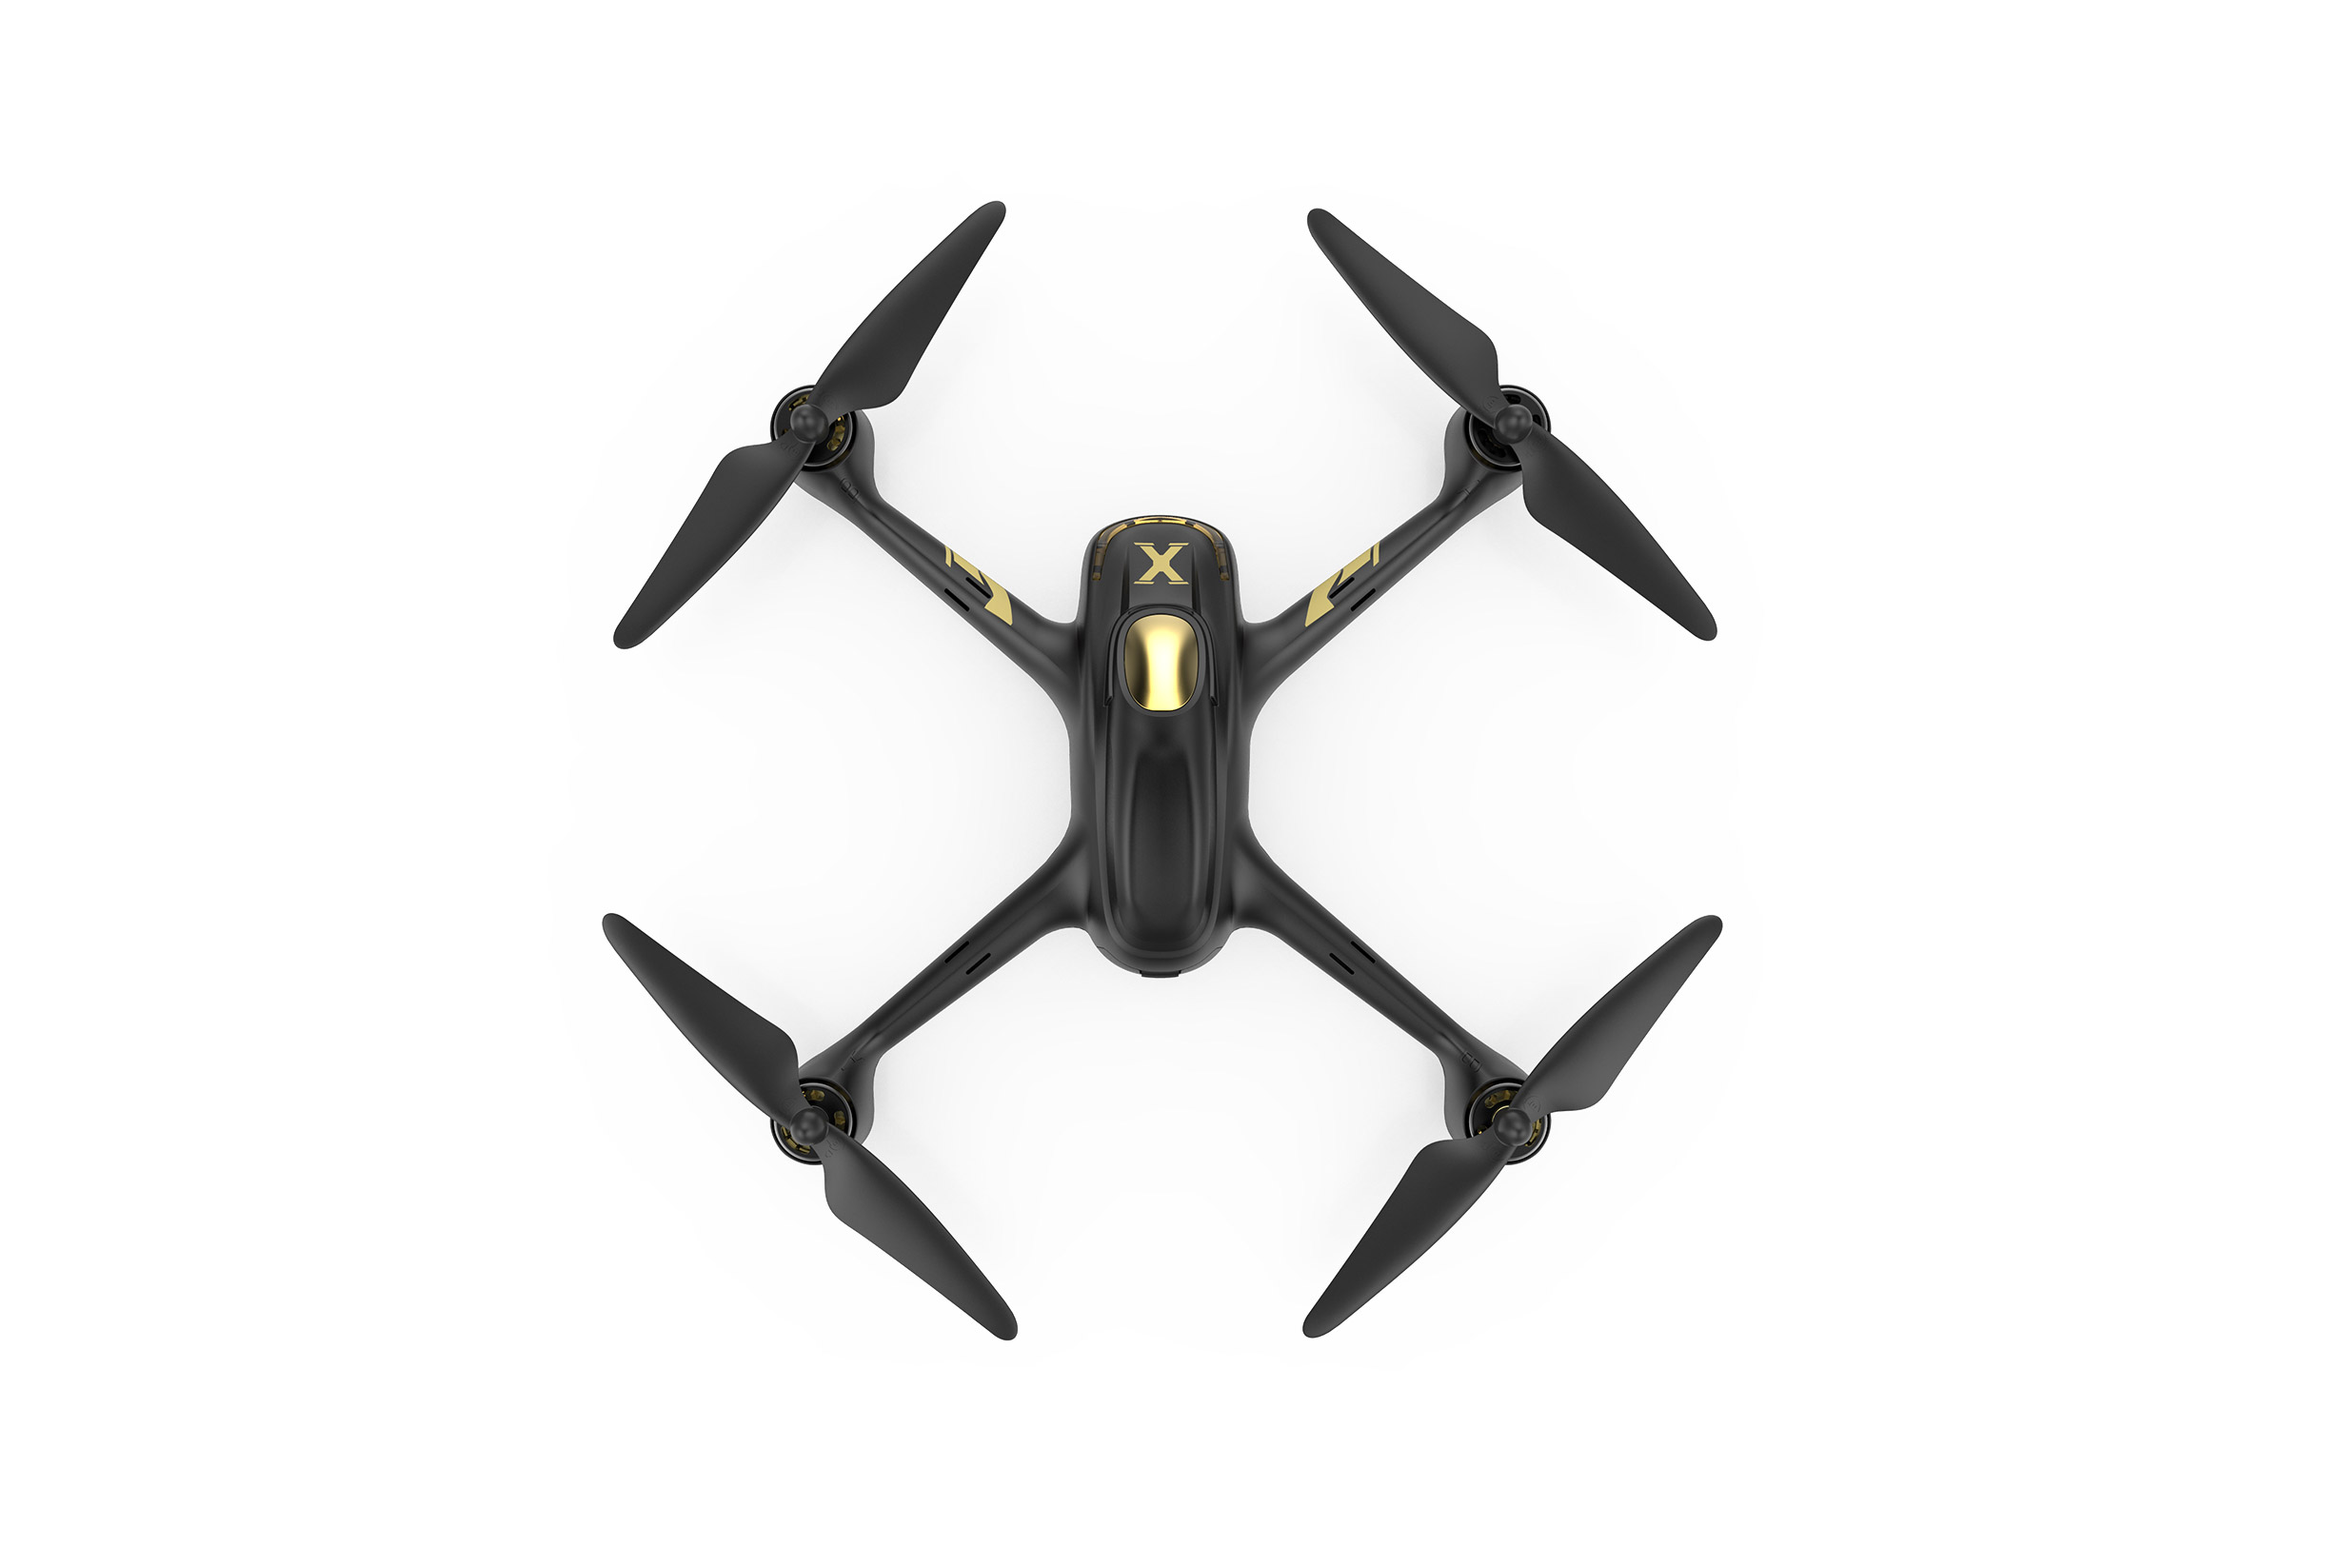 Hubsan X4 H501A Pro FPV Drone Brushless APP Quadcopter RTH GPS Follow Me+HT011A